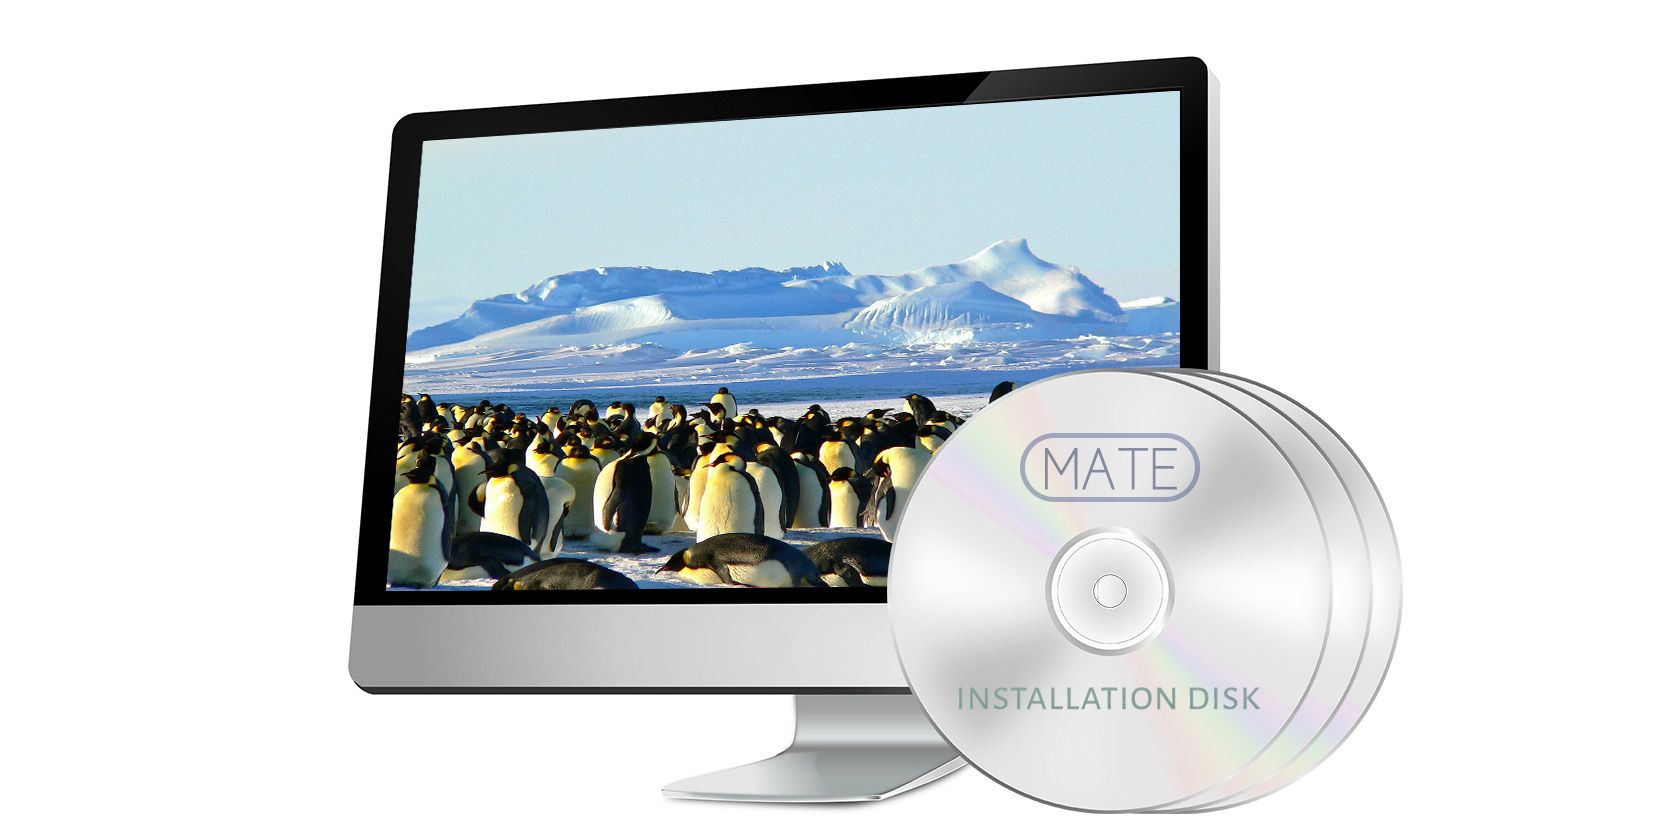 install-mate-linux